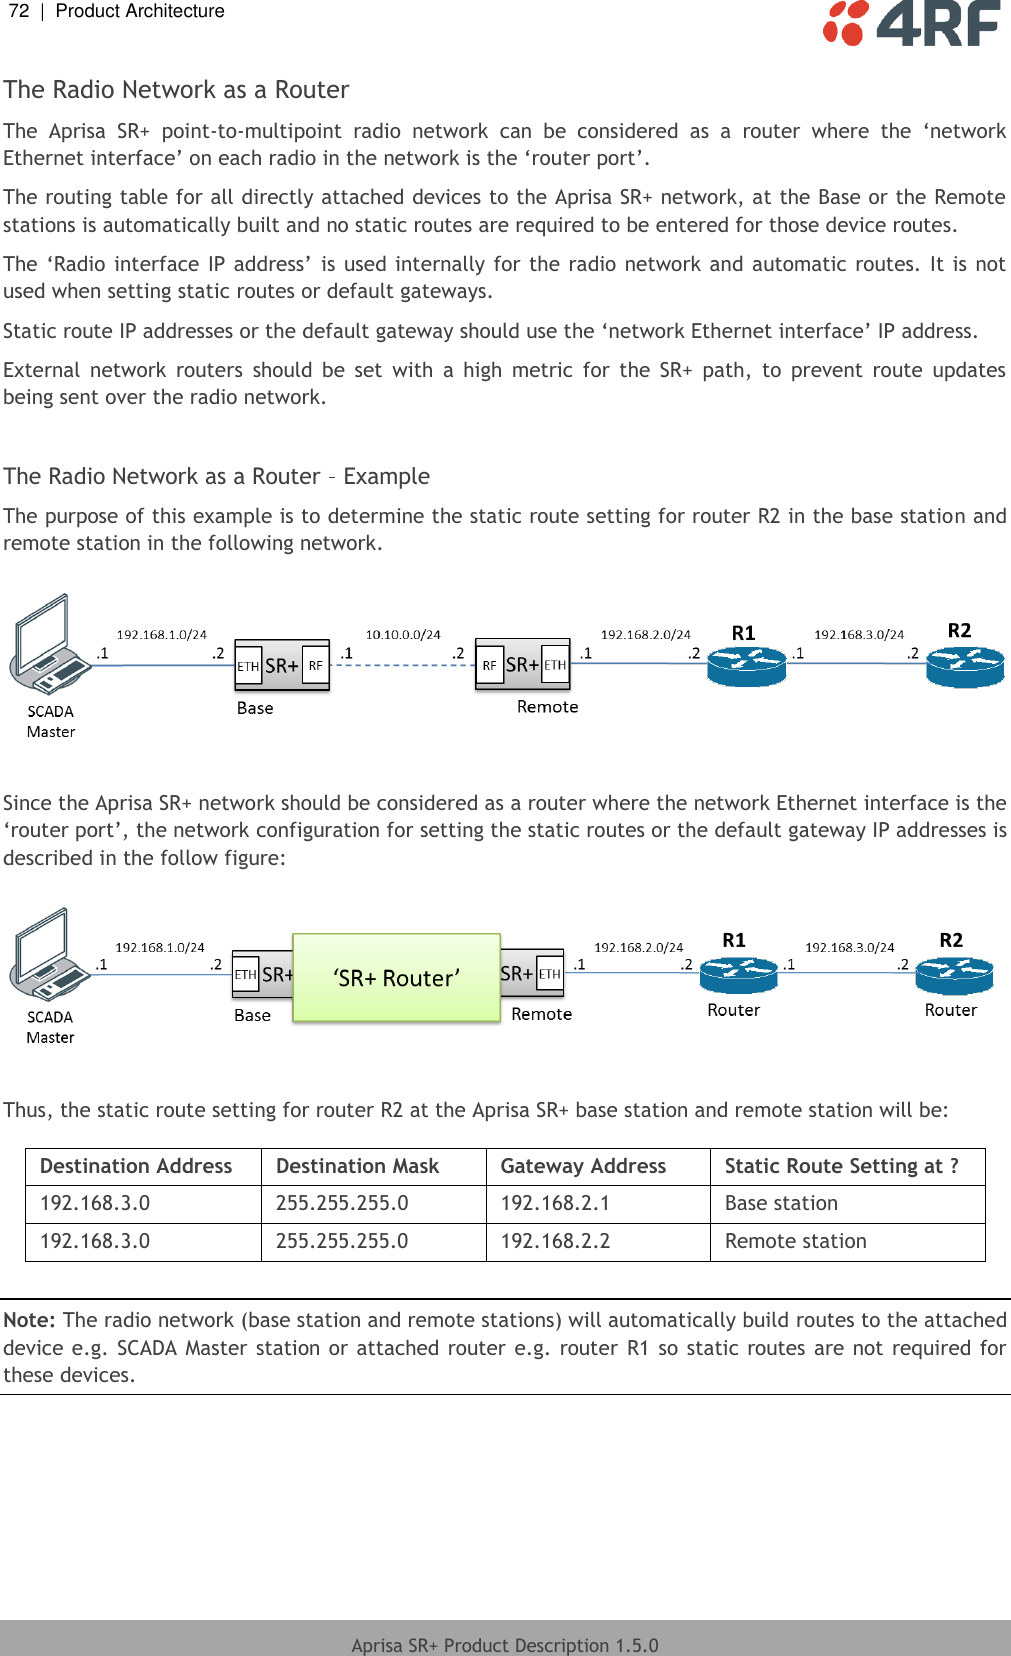 72  |  Product Architecture   Aprisa SR+ Product Description 1.5.0  The Radio Network as a Router The  Aprisa  SR+  point-to-multipoint  radio  network  can  be  considered  as  a  router  where  the  ‘network Ethernet interface’ on each radio in the network is the ‘router port’.   The routing table for all directly attached devices to the Aprisa SR+ network, at the Base or the Remote stations is automatically built and no static routes are required to be entered for those device routes.  The ‘Radio interface  IP address’ is used internally for the radio network and automatic routes.  It is not used when setting static routes or default gateways. Static route IP addresses or the default gateway should use the ‘network Ethernet interface’ IP address.  External  network  routers  should  be  set  with  a  high  metric  for  the  SR+  path,  to  prevent  route  updates being sent over the radio network.  The Radio Network as a Router – Example  The purpose of this example is to determine the static route setting for router R2 in the base station and remote station in the following network.    Since the Aprisa SR+ network should be considered as a router where the network Ethernet interface is the ‘router port’, the network configuration for setting the static routes or the default gateway IP addresses is described in the follow figure:    Thus, the static route setting for router R2 at the Aprisa SR+ base station and remote station will be:  Destination Address  Destination Mask Gateway Address  Static Route Setting at ? 192.168.3.0 255.255.255.0 192.168.2.1 Base station 192.168.3.0 255.255.255.0 192.168.2.2 Remote station  Note: The radio network (base station and remote stations) will automatically build routes to the attached device e.g. SCADA  Master station or attached router  e.g. router  R1 so static routes are not required for these devices.   